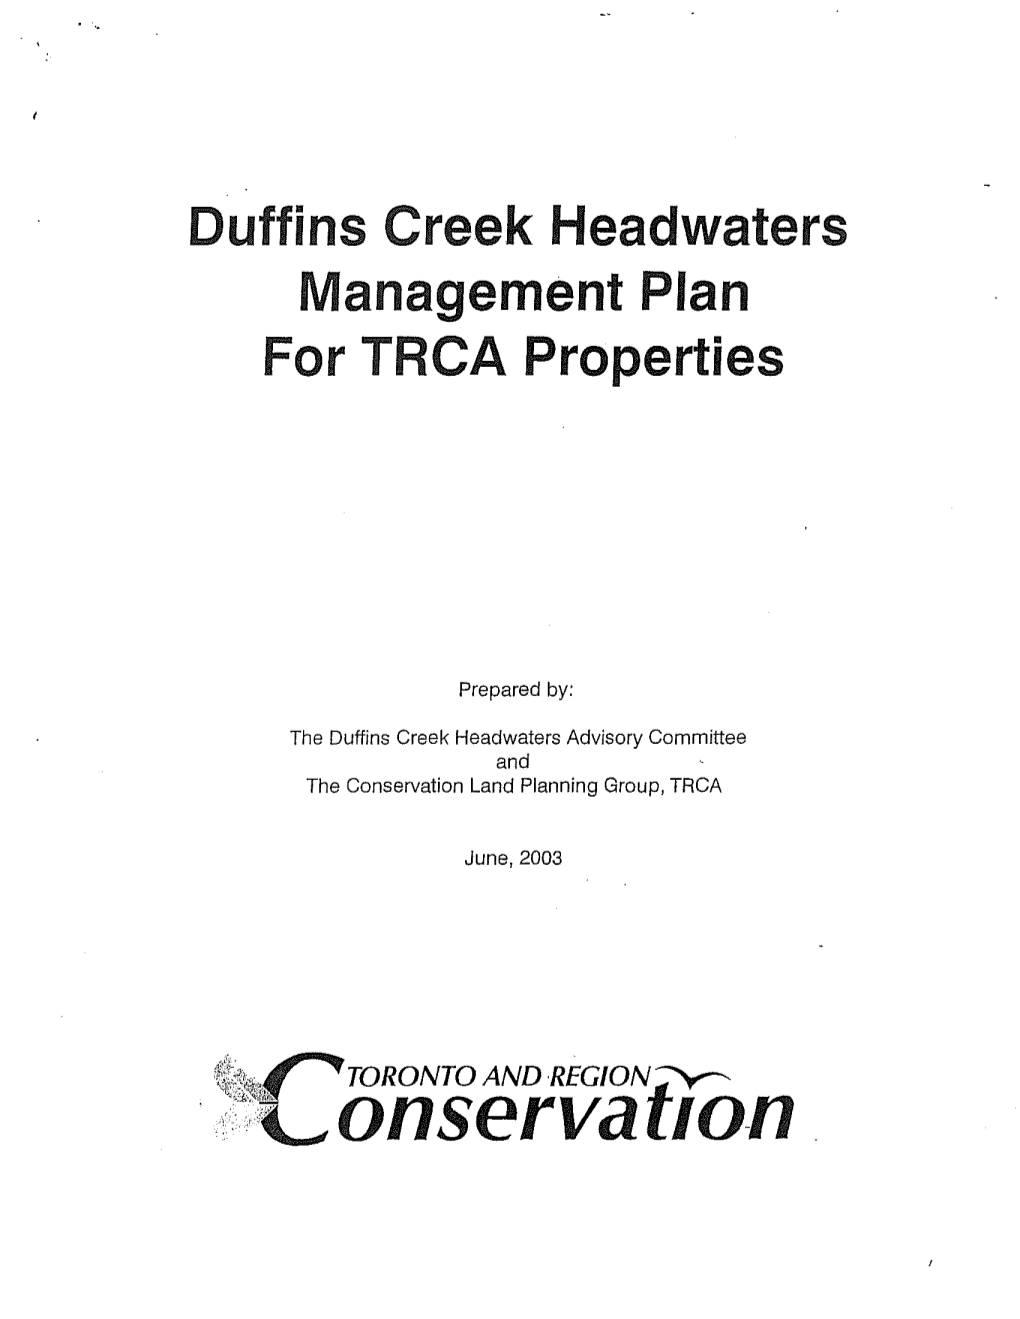 Duffins Creek Headwaters Management Plan for TRCA Properties